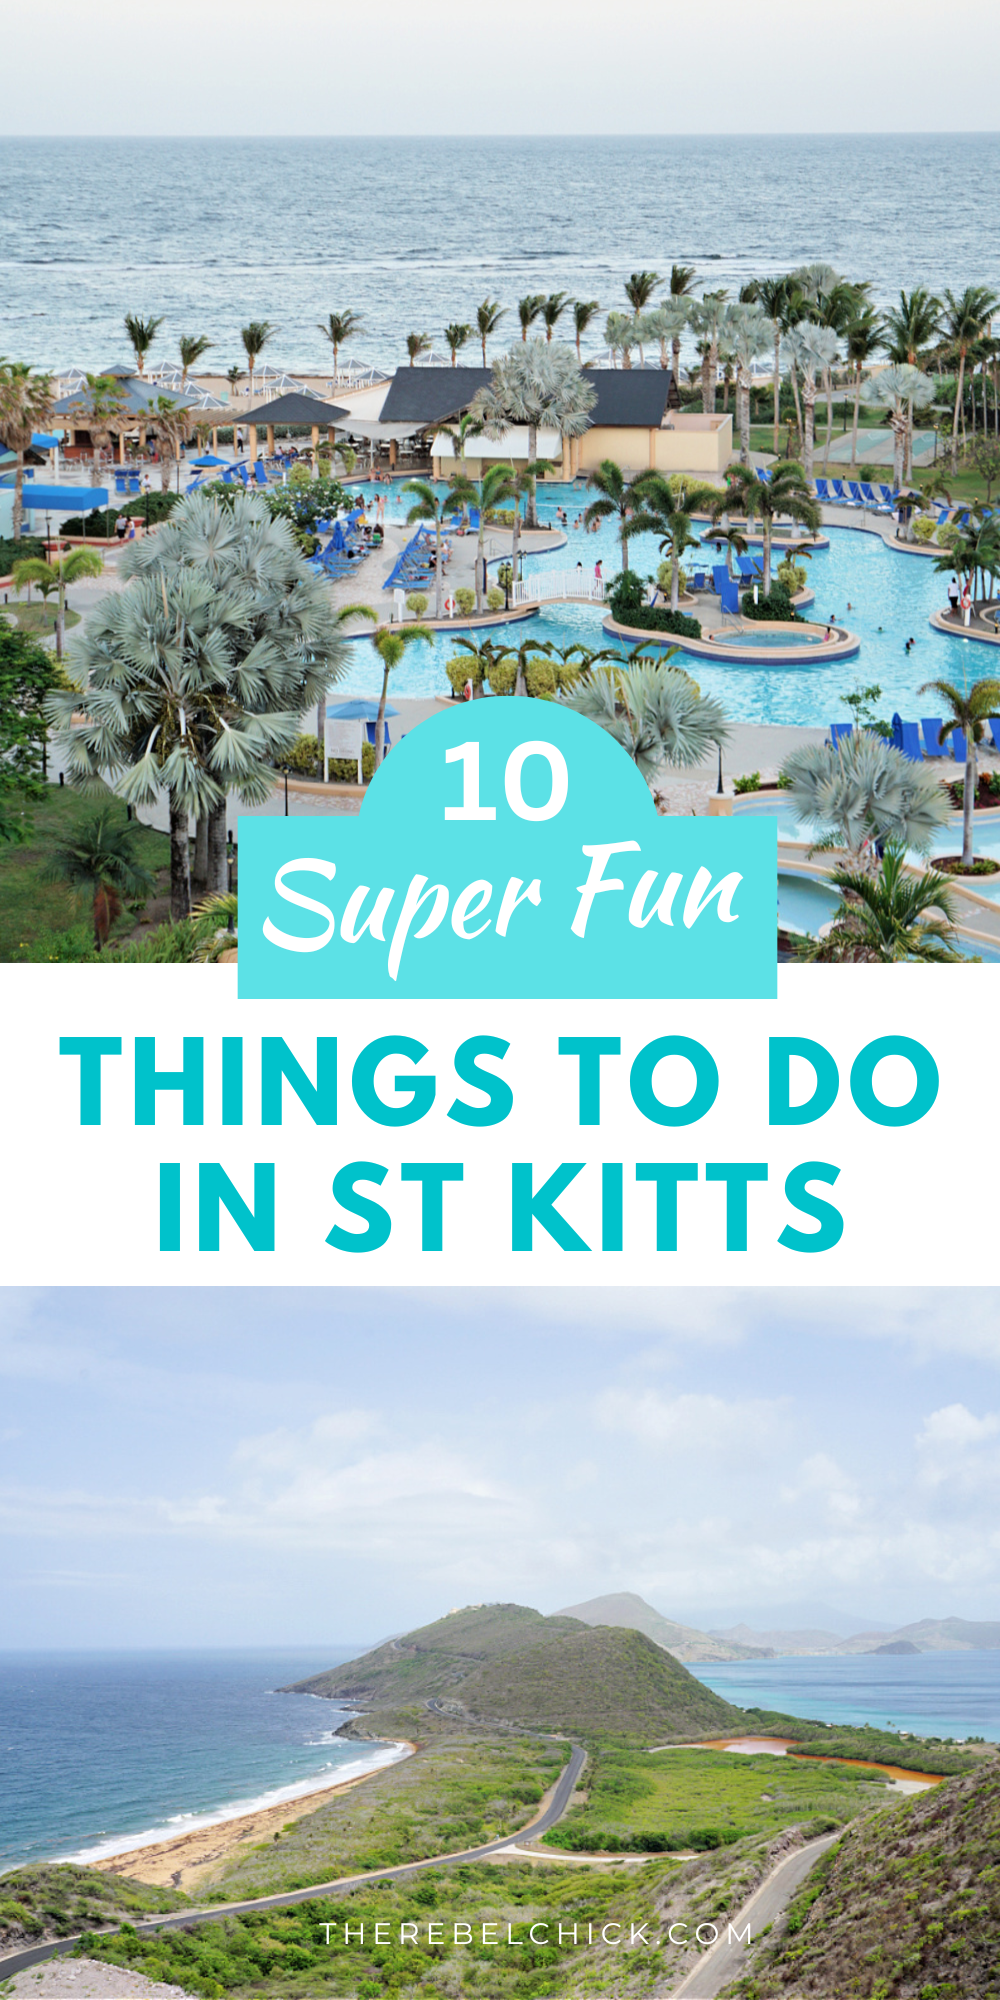 10 Things to Do in St Kitts